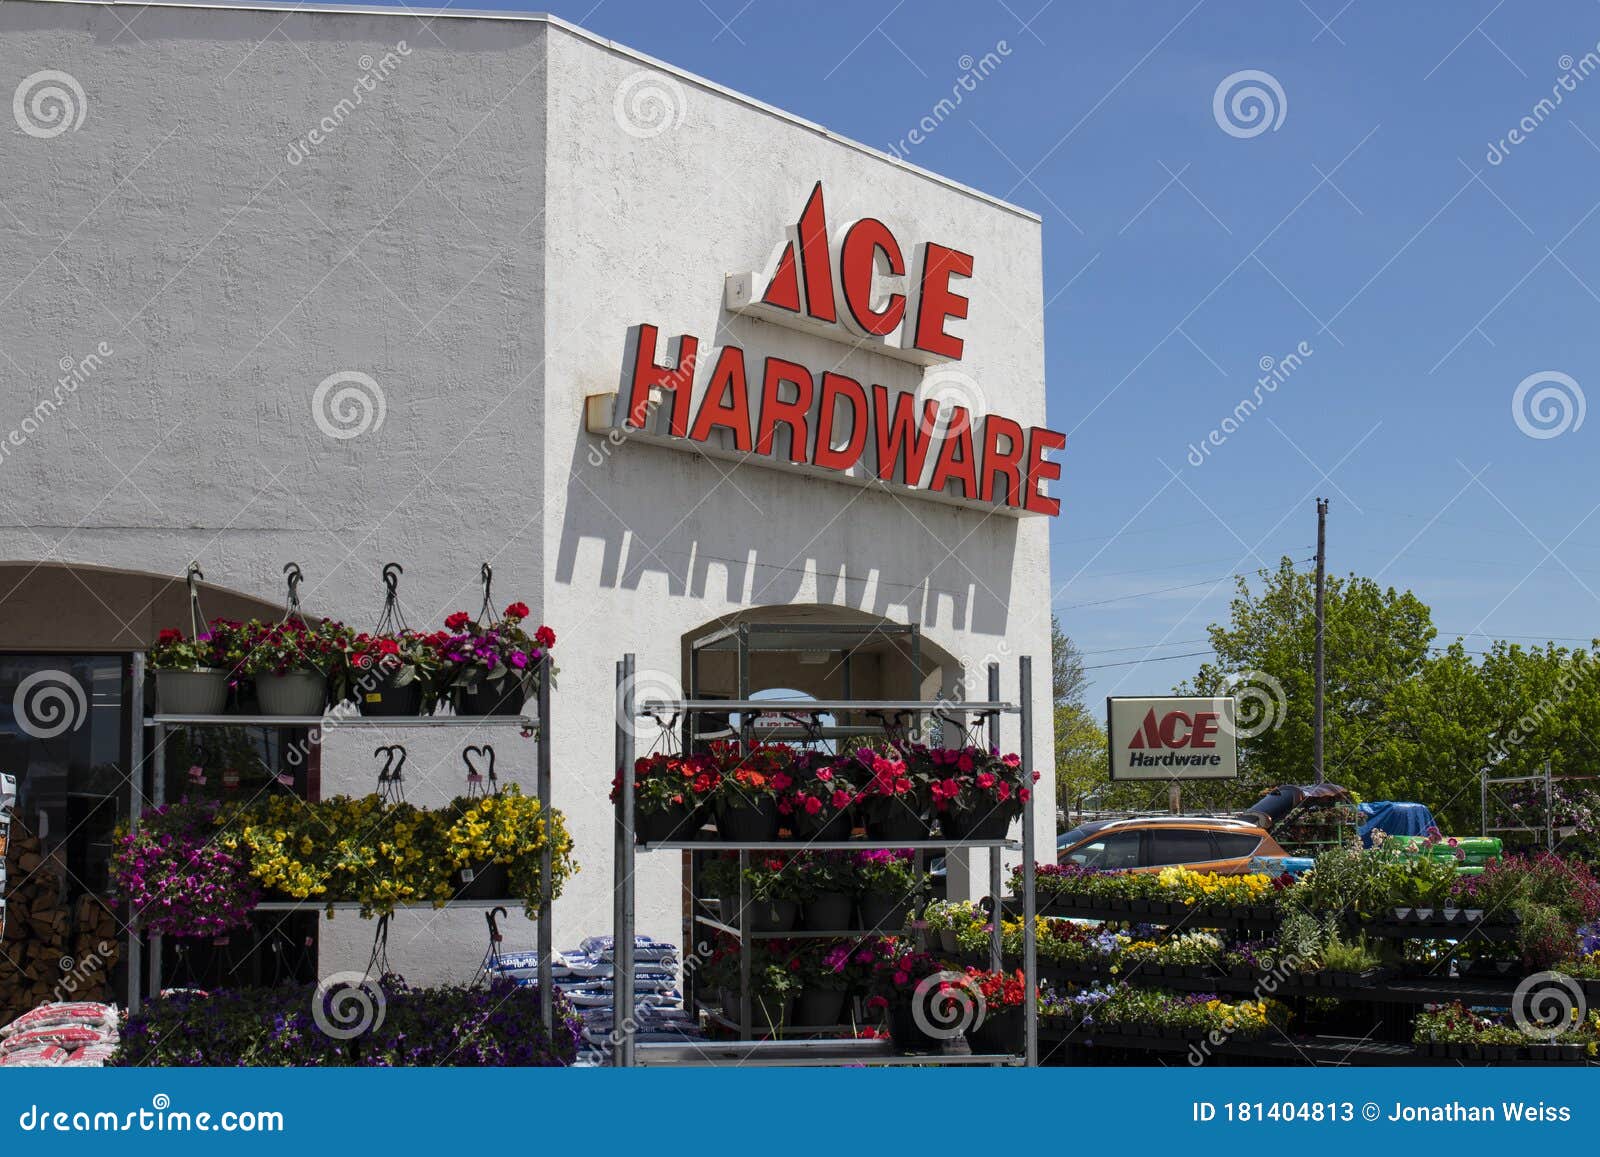 Ace Hardware Retail Cooperative. The Majority Of Ace